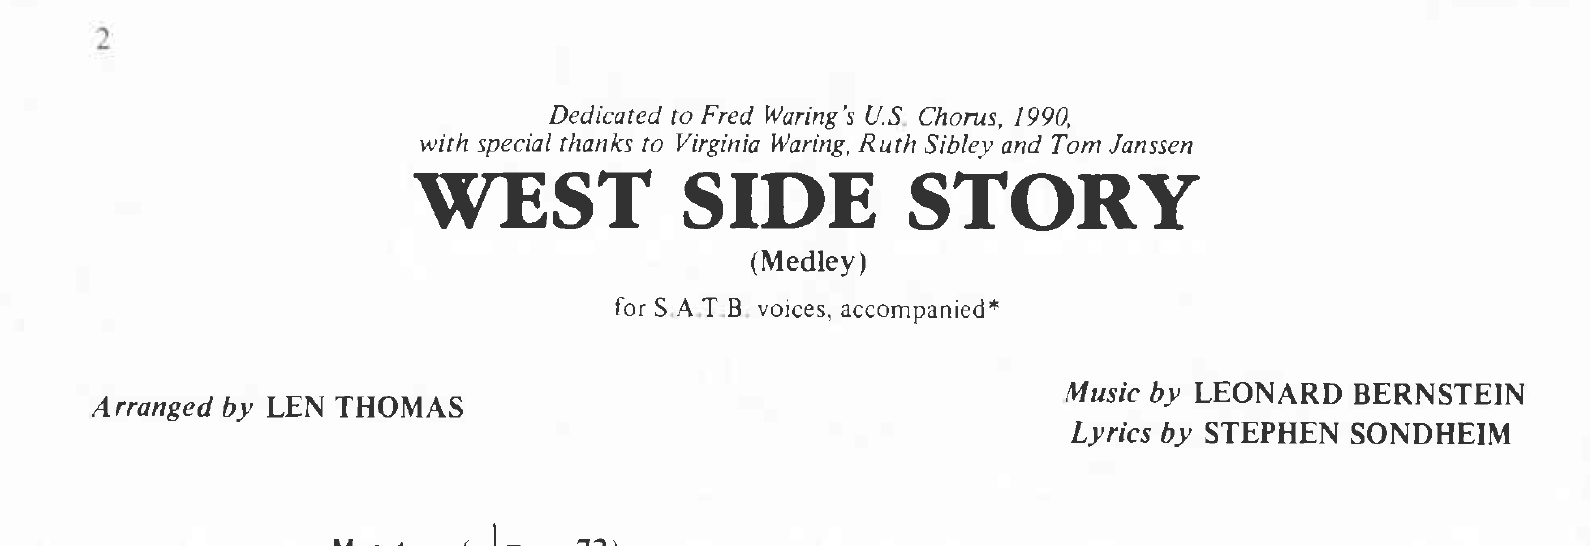 West Side Story Medley SATB